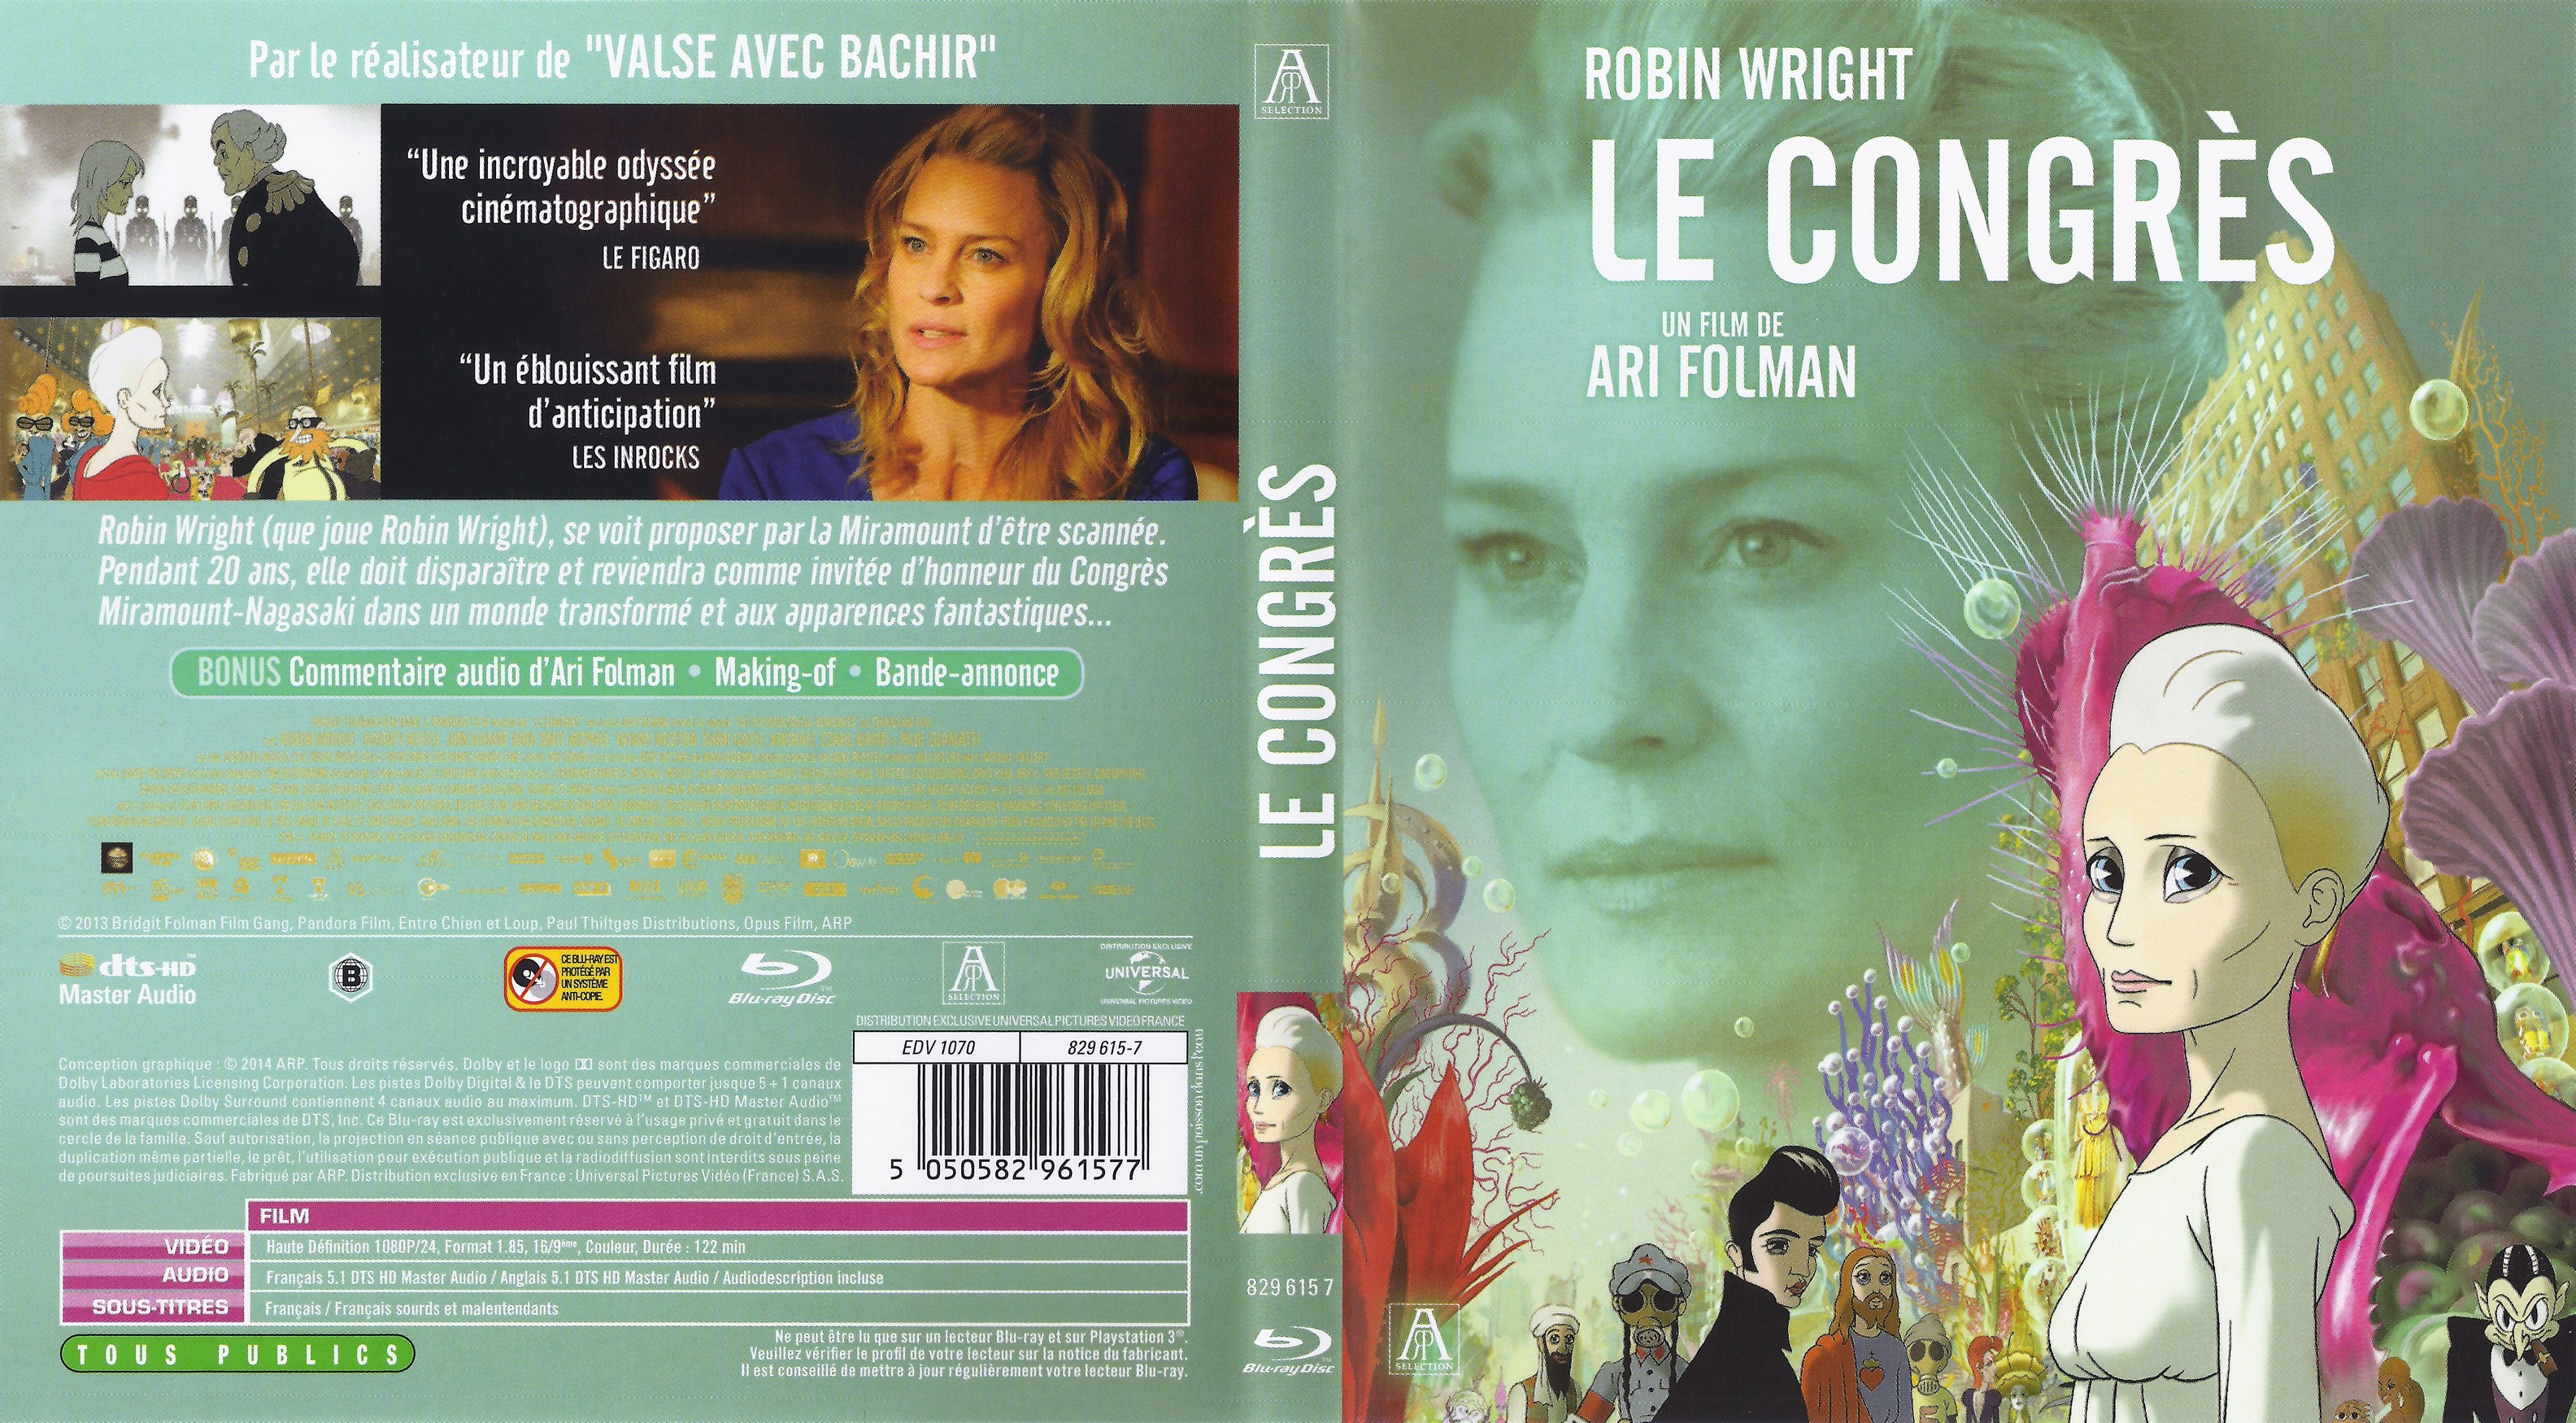 Jaquette DVD Le Congrs (BLU-RAY)